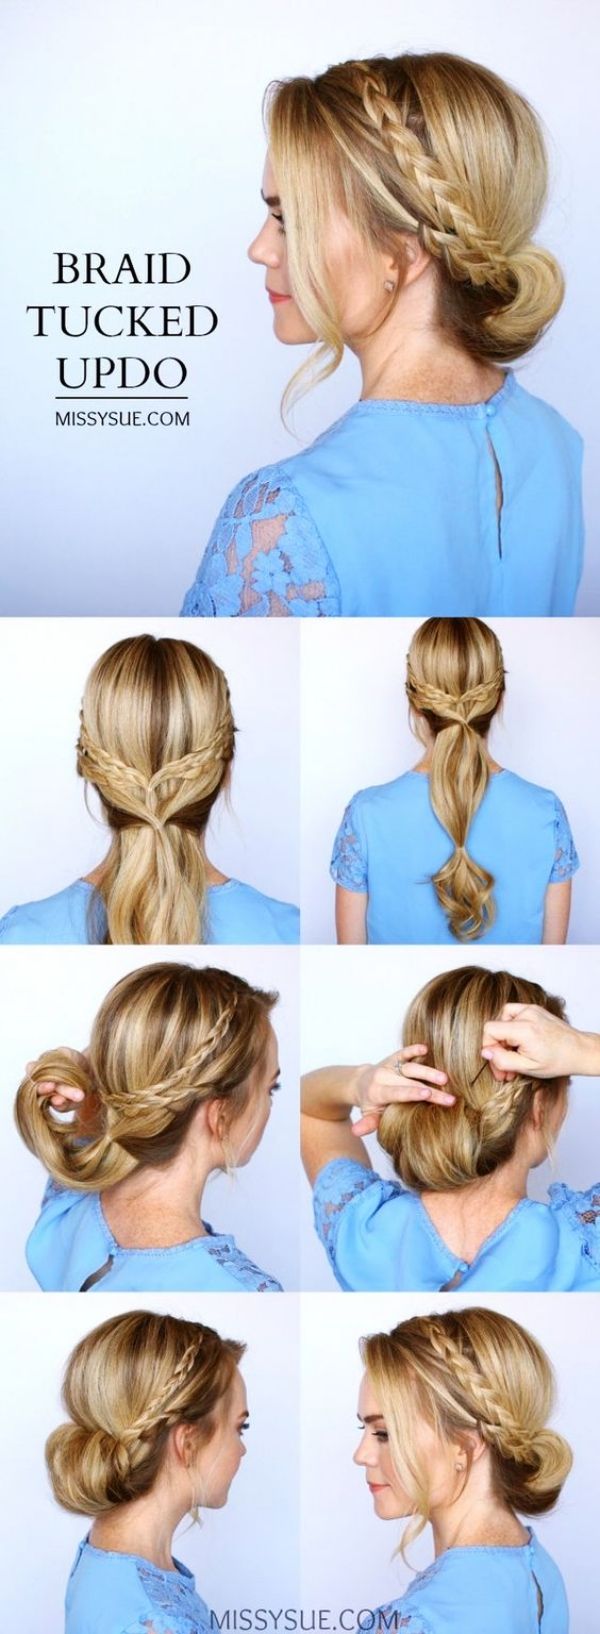 [ad_1]

Hairstyles-That-Can-be-Done-in-3-Minutes
Source by aislinguna
[ad_2]
			
			…